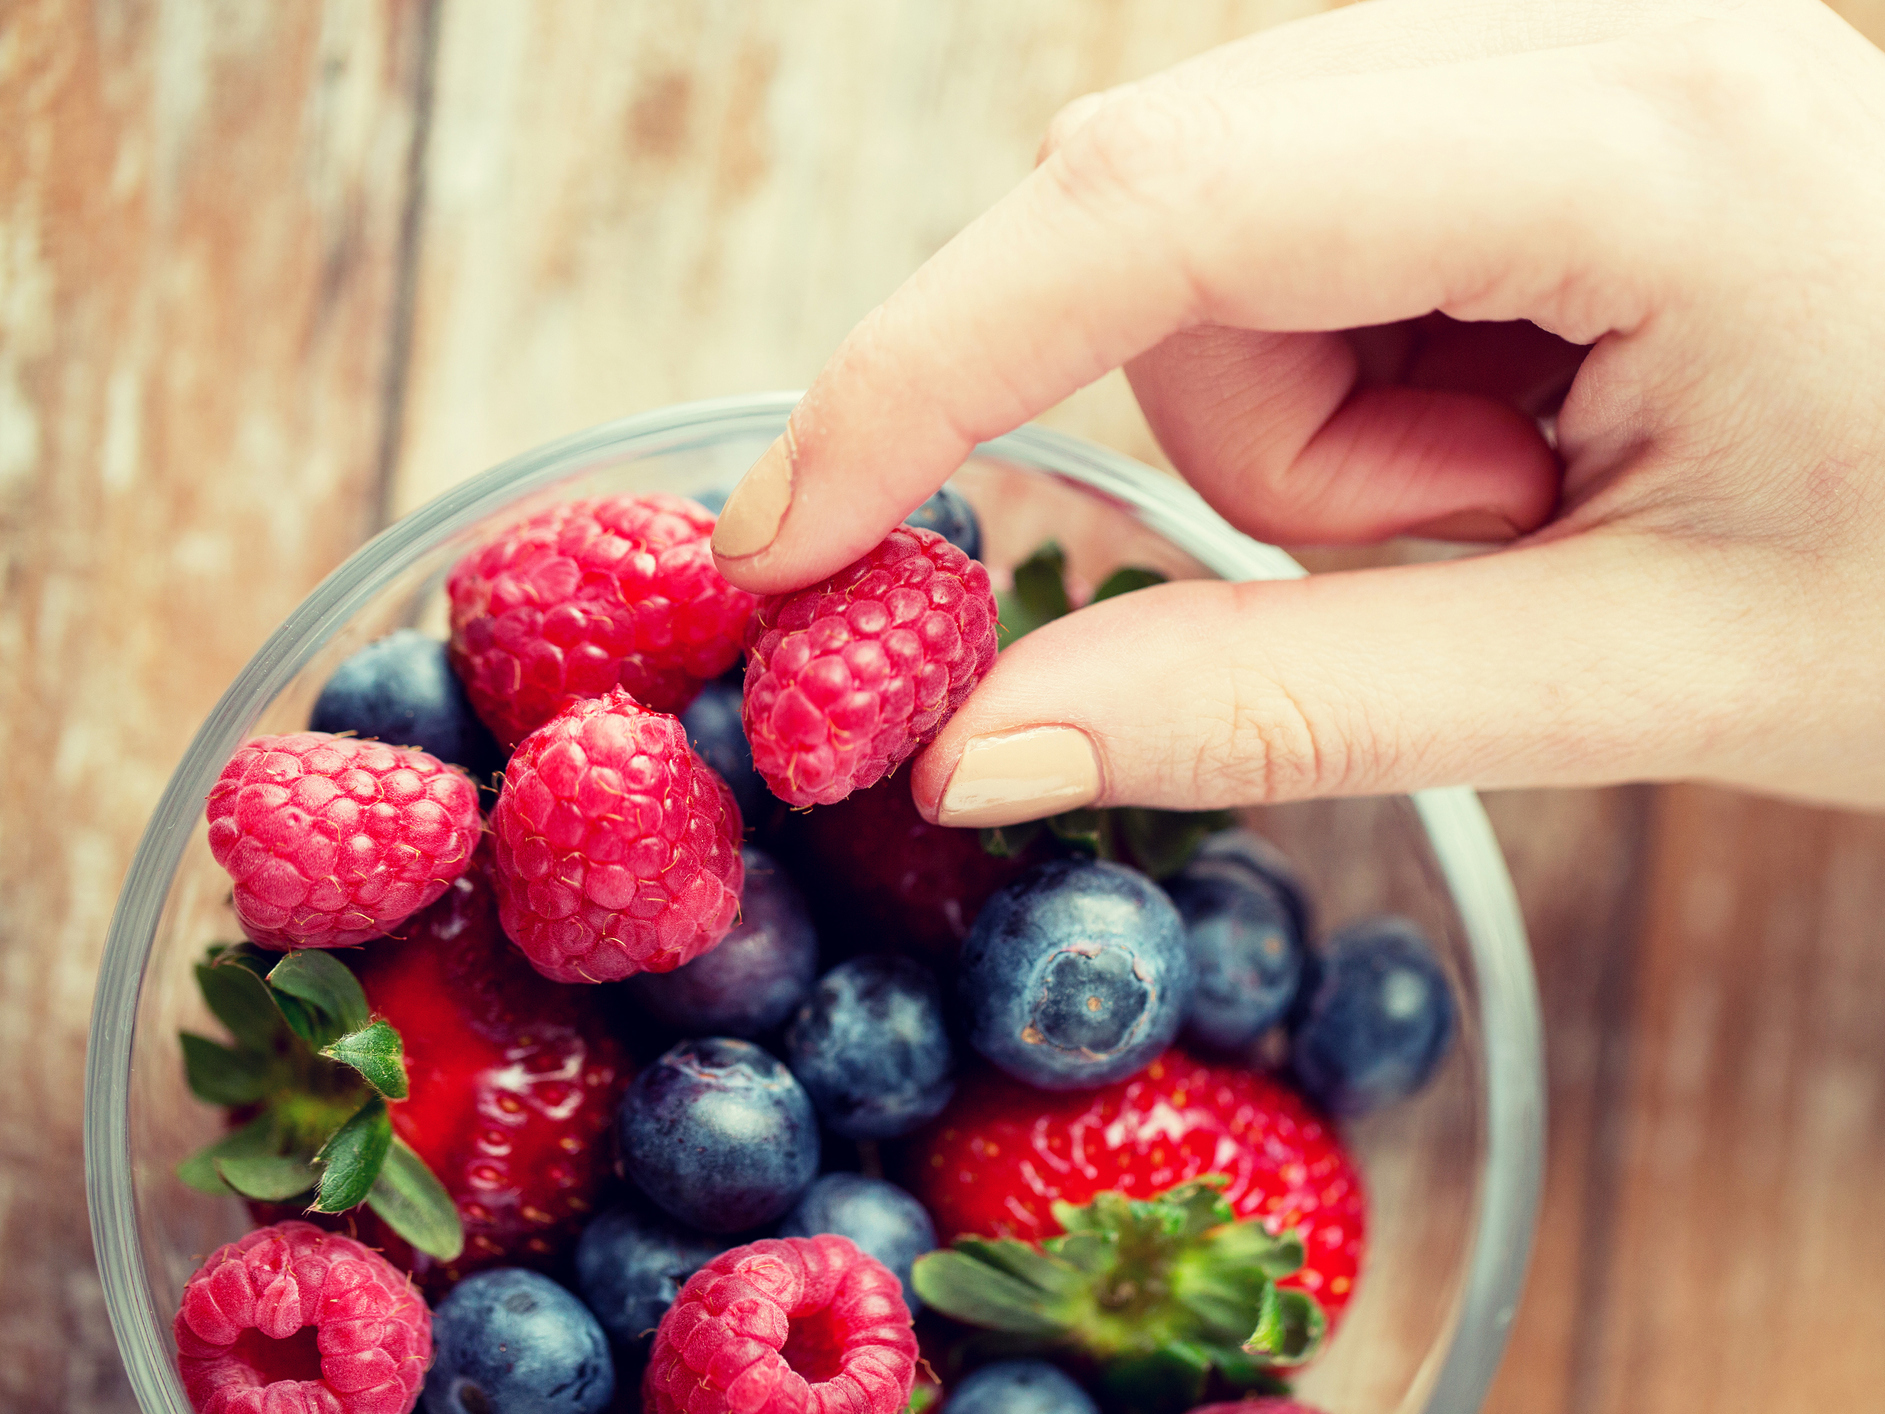 A berry good way to lower the risk of heart problems by 15 percent